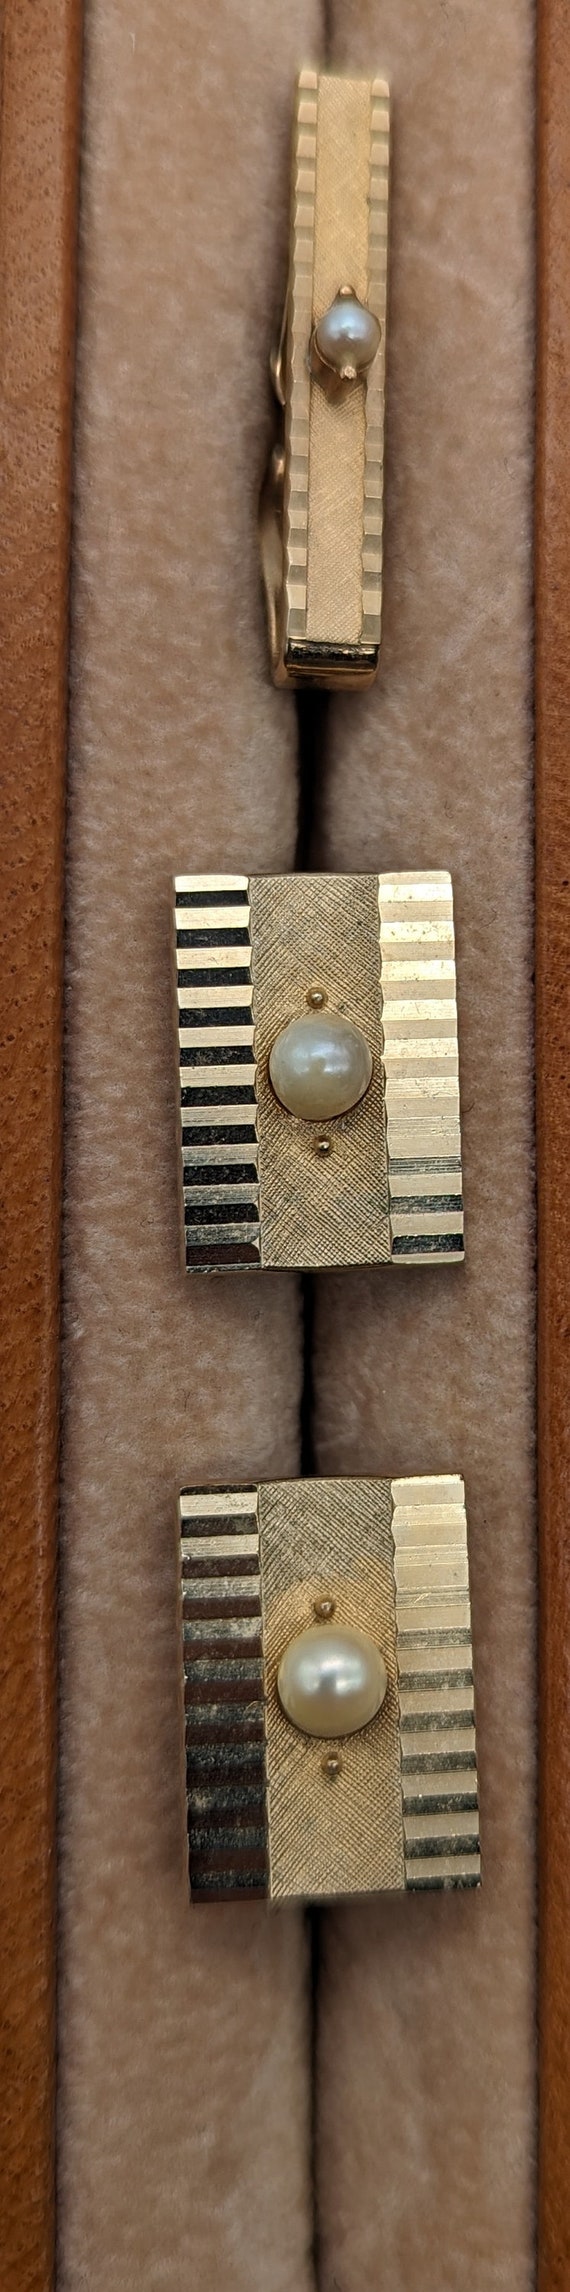 Vintage Swank pair of cuff links and tie bar